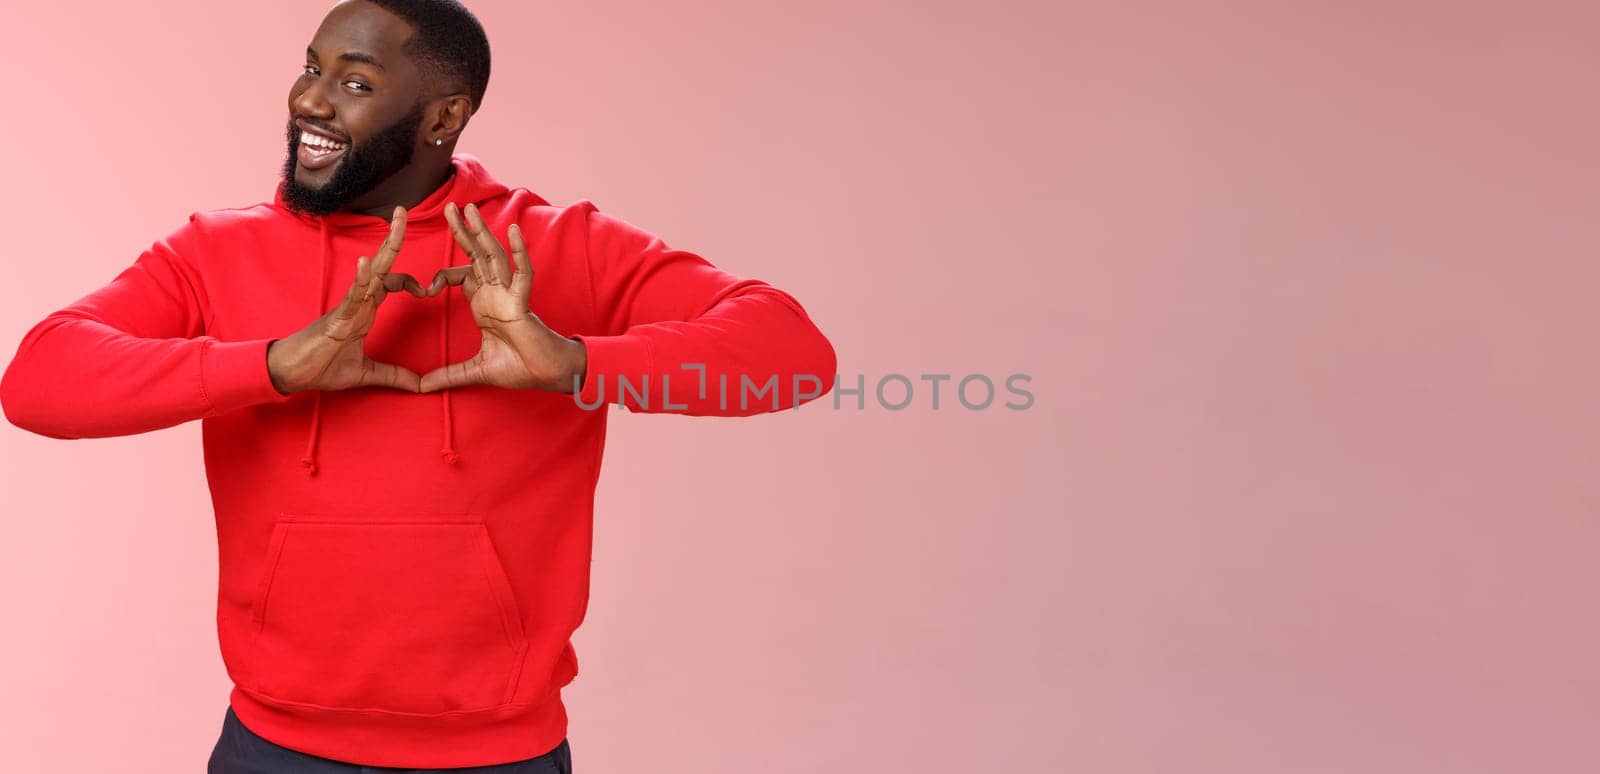 Someone love ya. Portrait enthusiastic creative cute black boyfriend wearing red hoodie show heart sign smiling broadly confessing love sympathy look passionate, express romance pink background by Benzoix